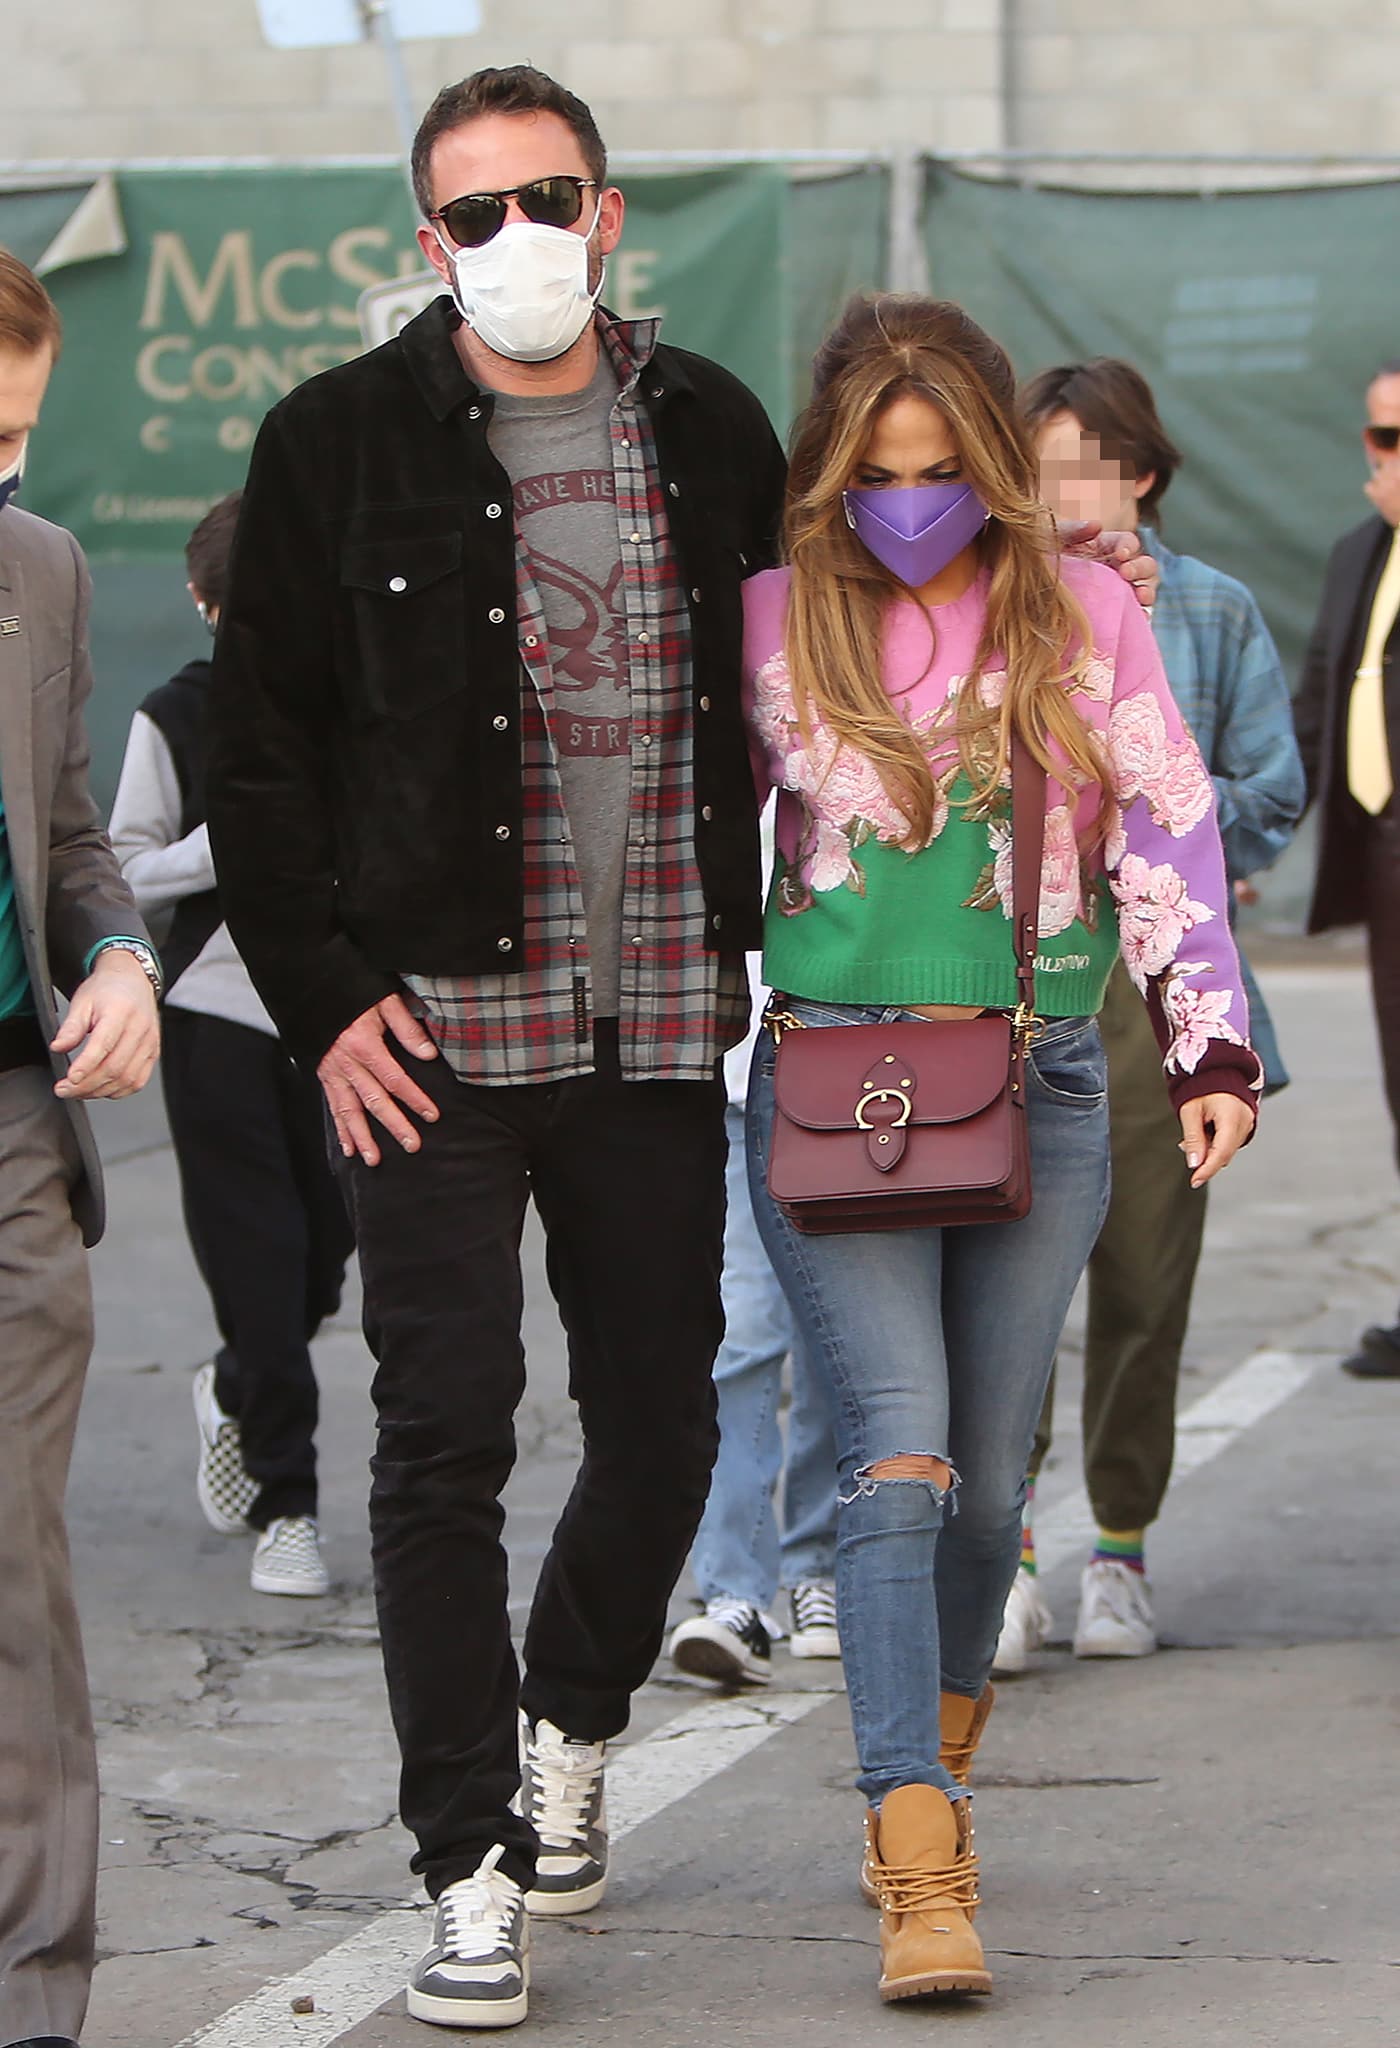 Ben Affleck and Jennifer Lopez bring their blended family to watch Licorice Pizza at Regency Village Theatre